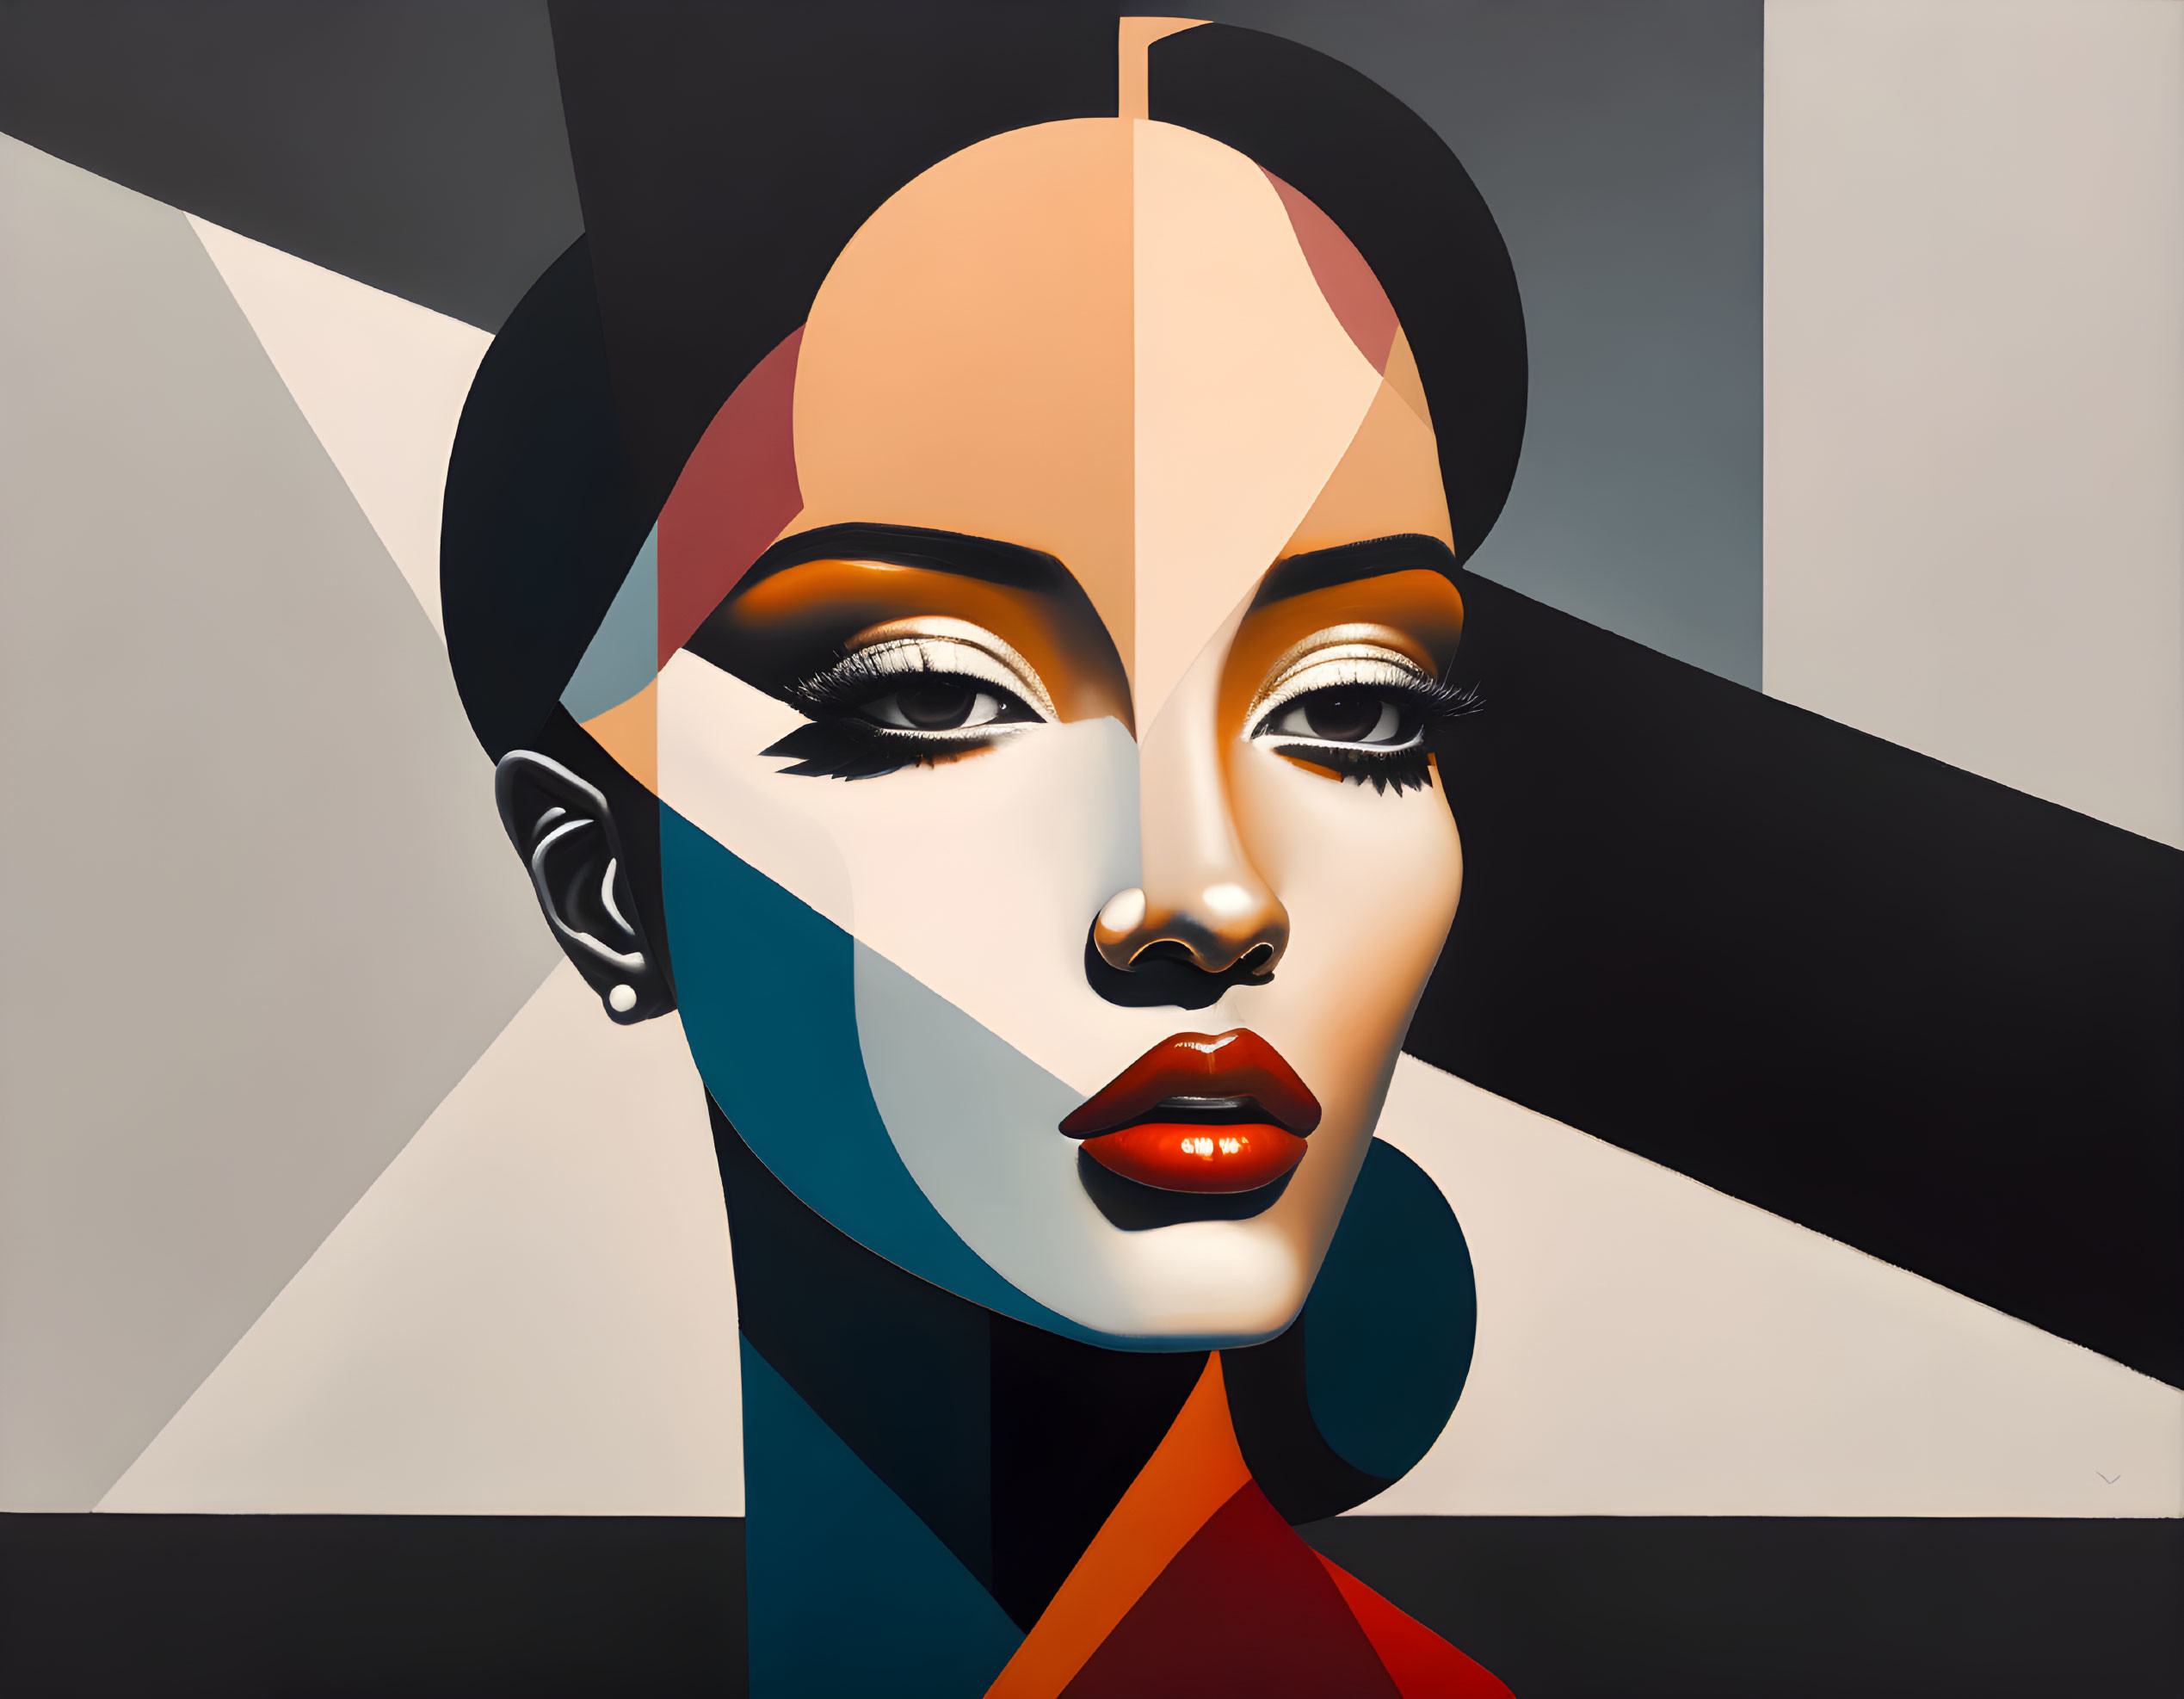 Geometric Abstract Portrait with Contrasting Colors